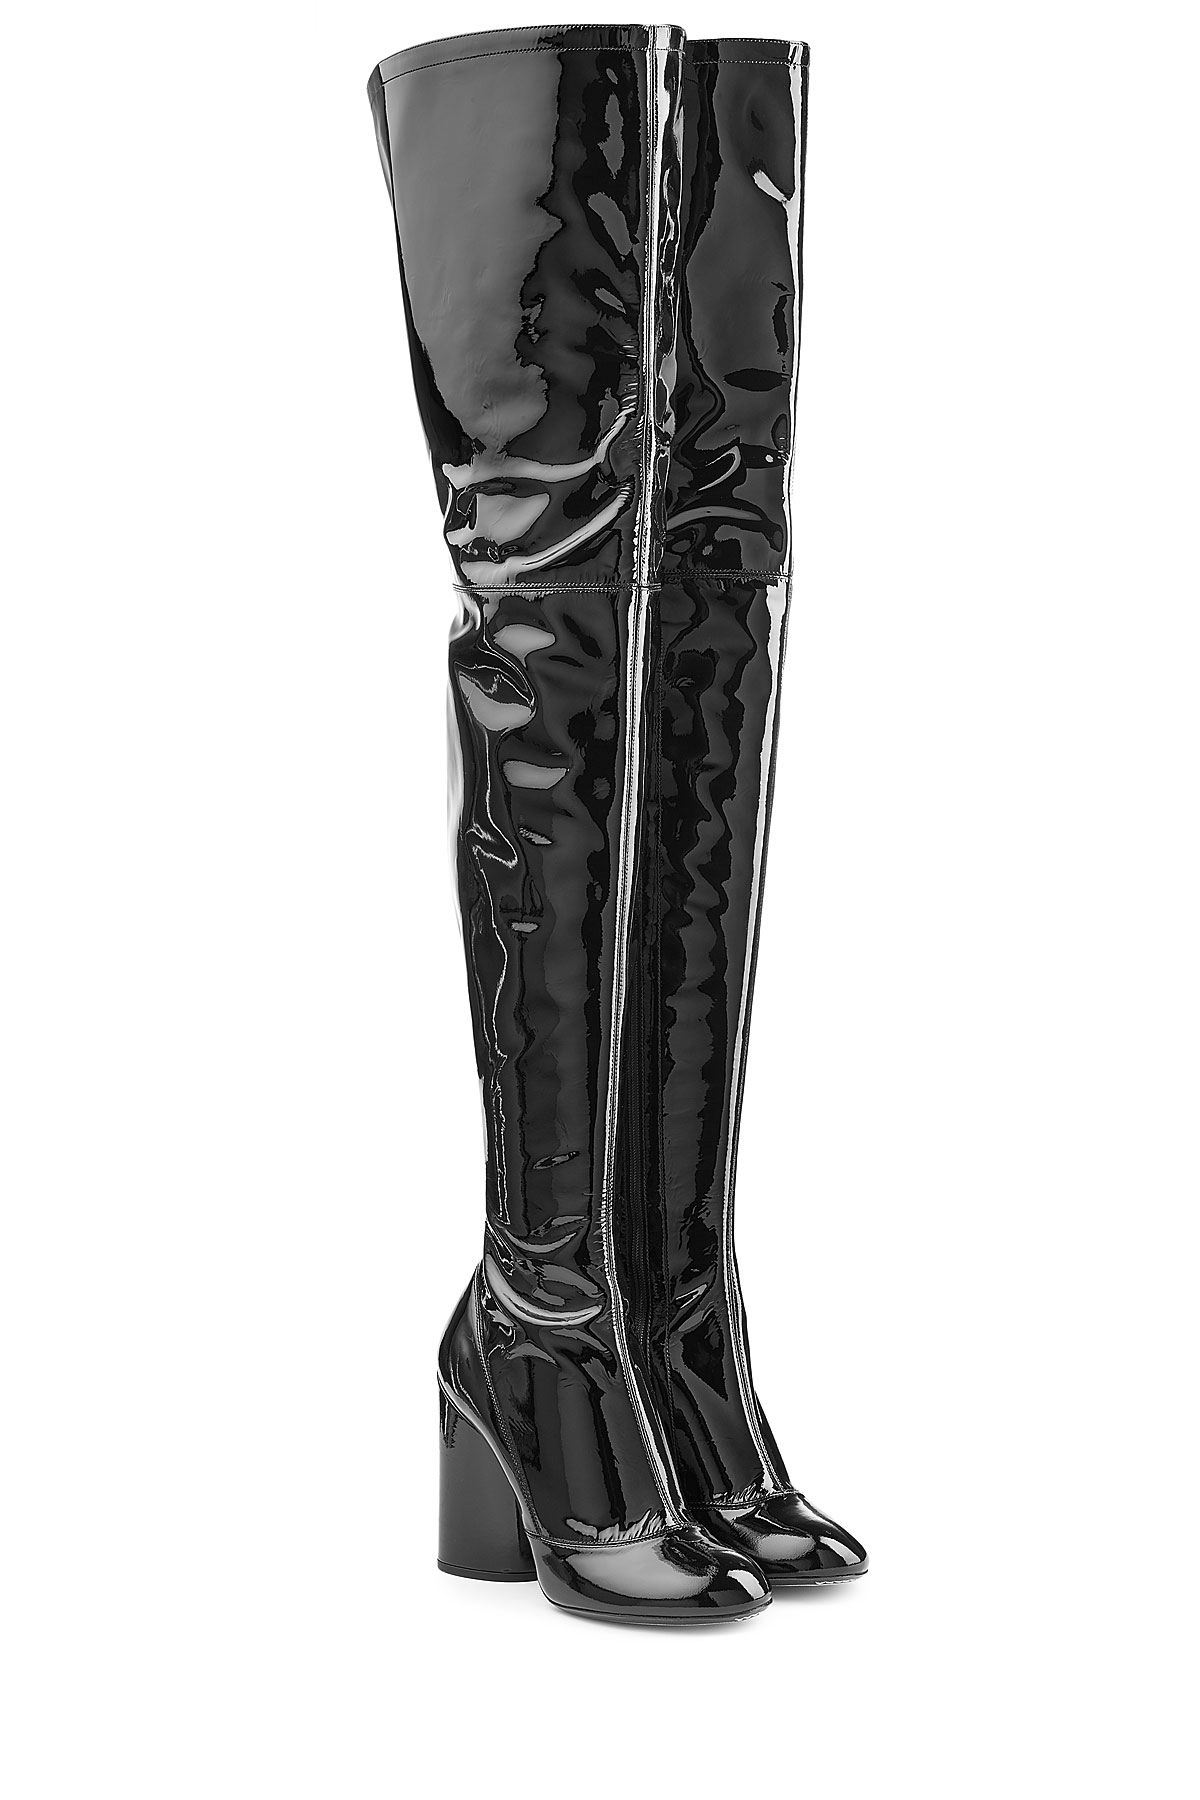 Marc jacobs Patent Leather Thigh-high Boots - Black in Black | Lyst